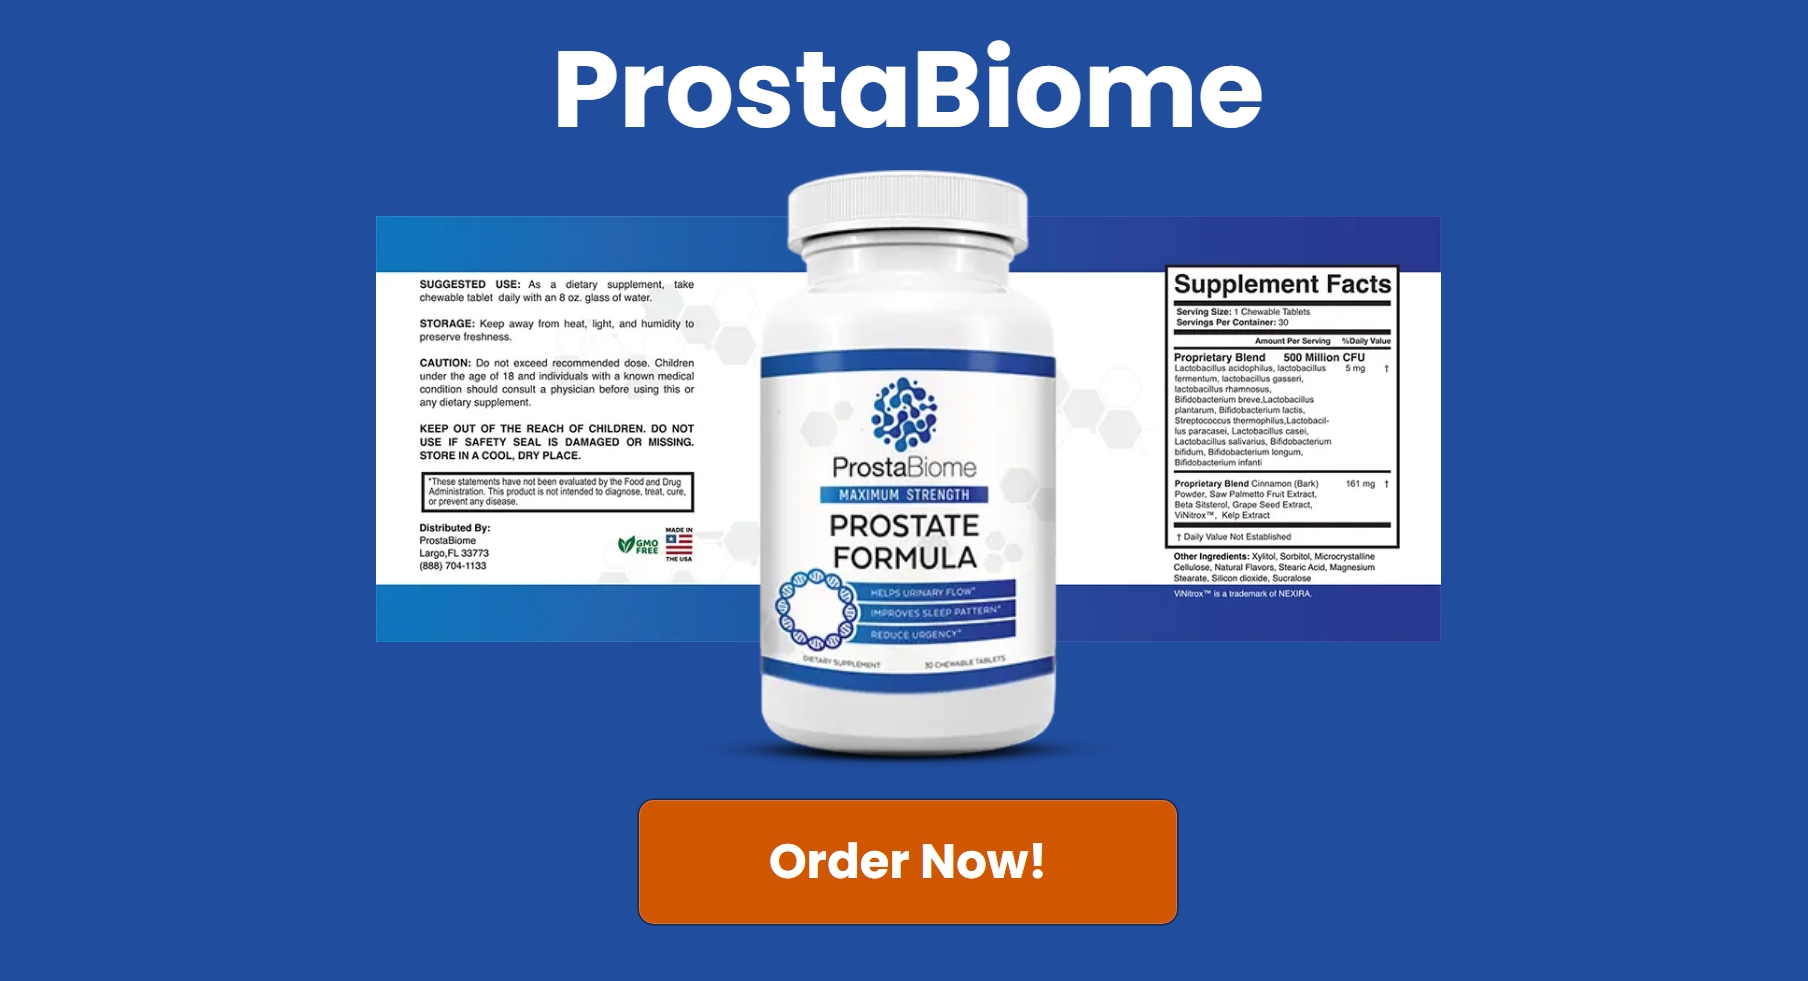 ProstaBiome supplement facts